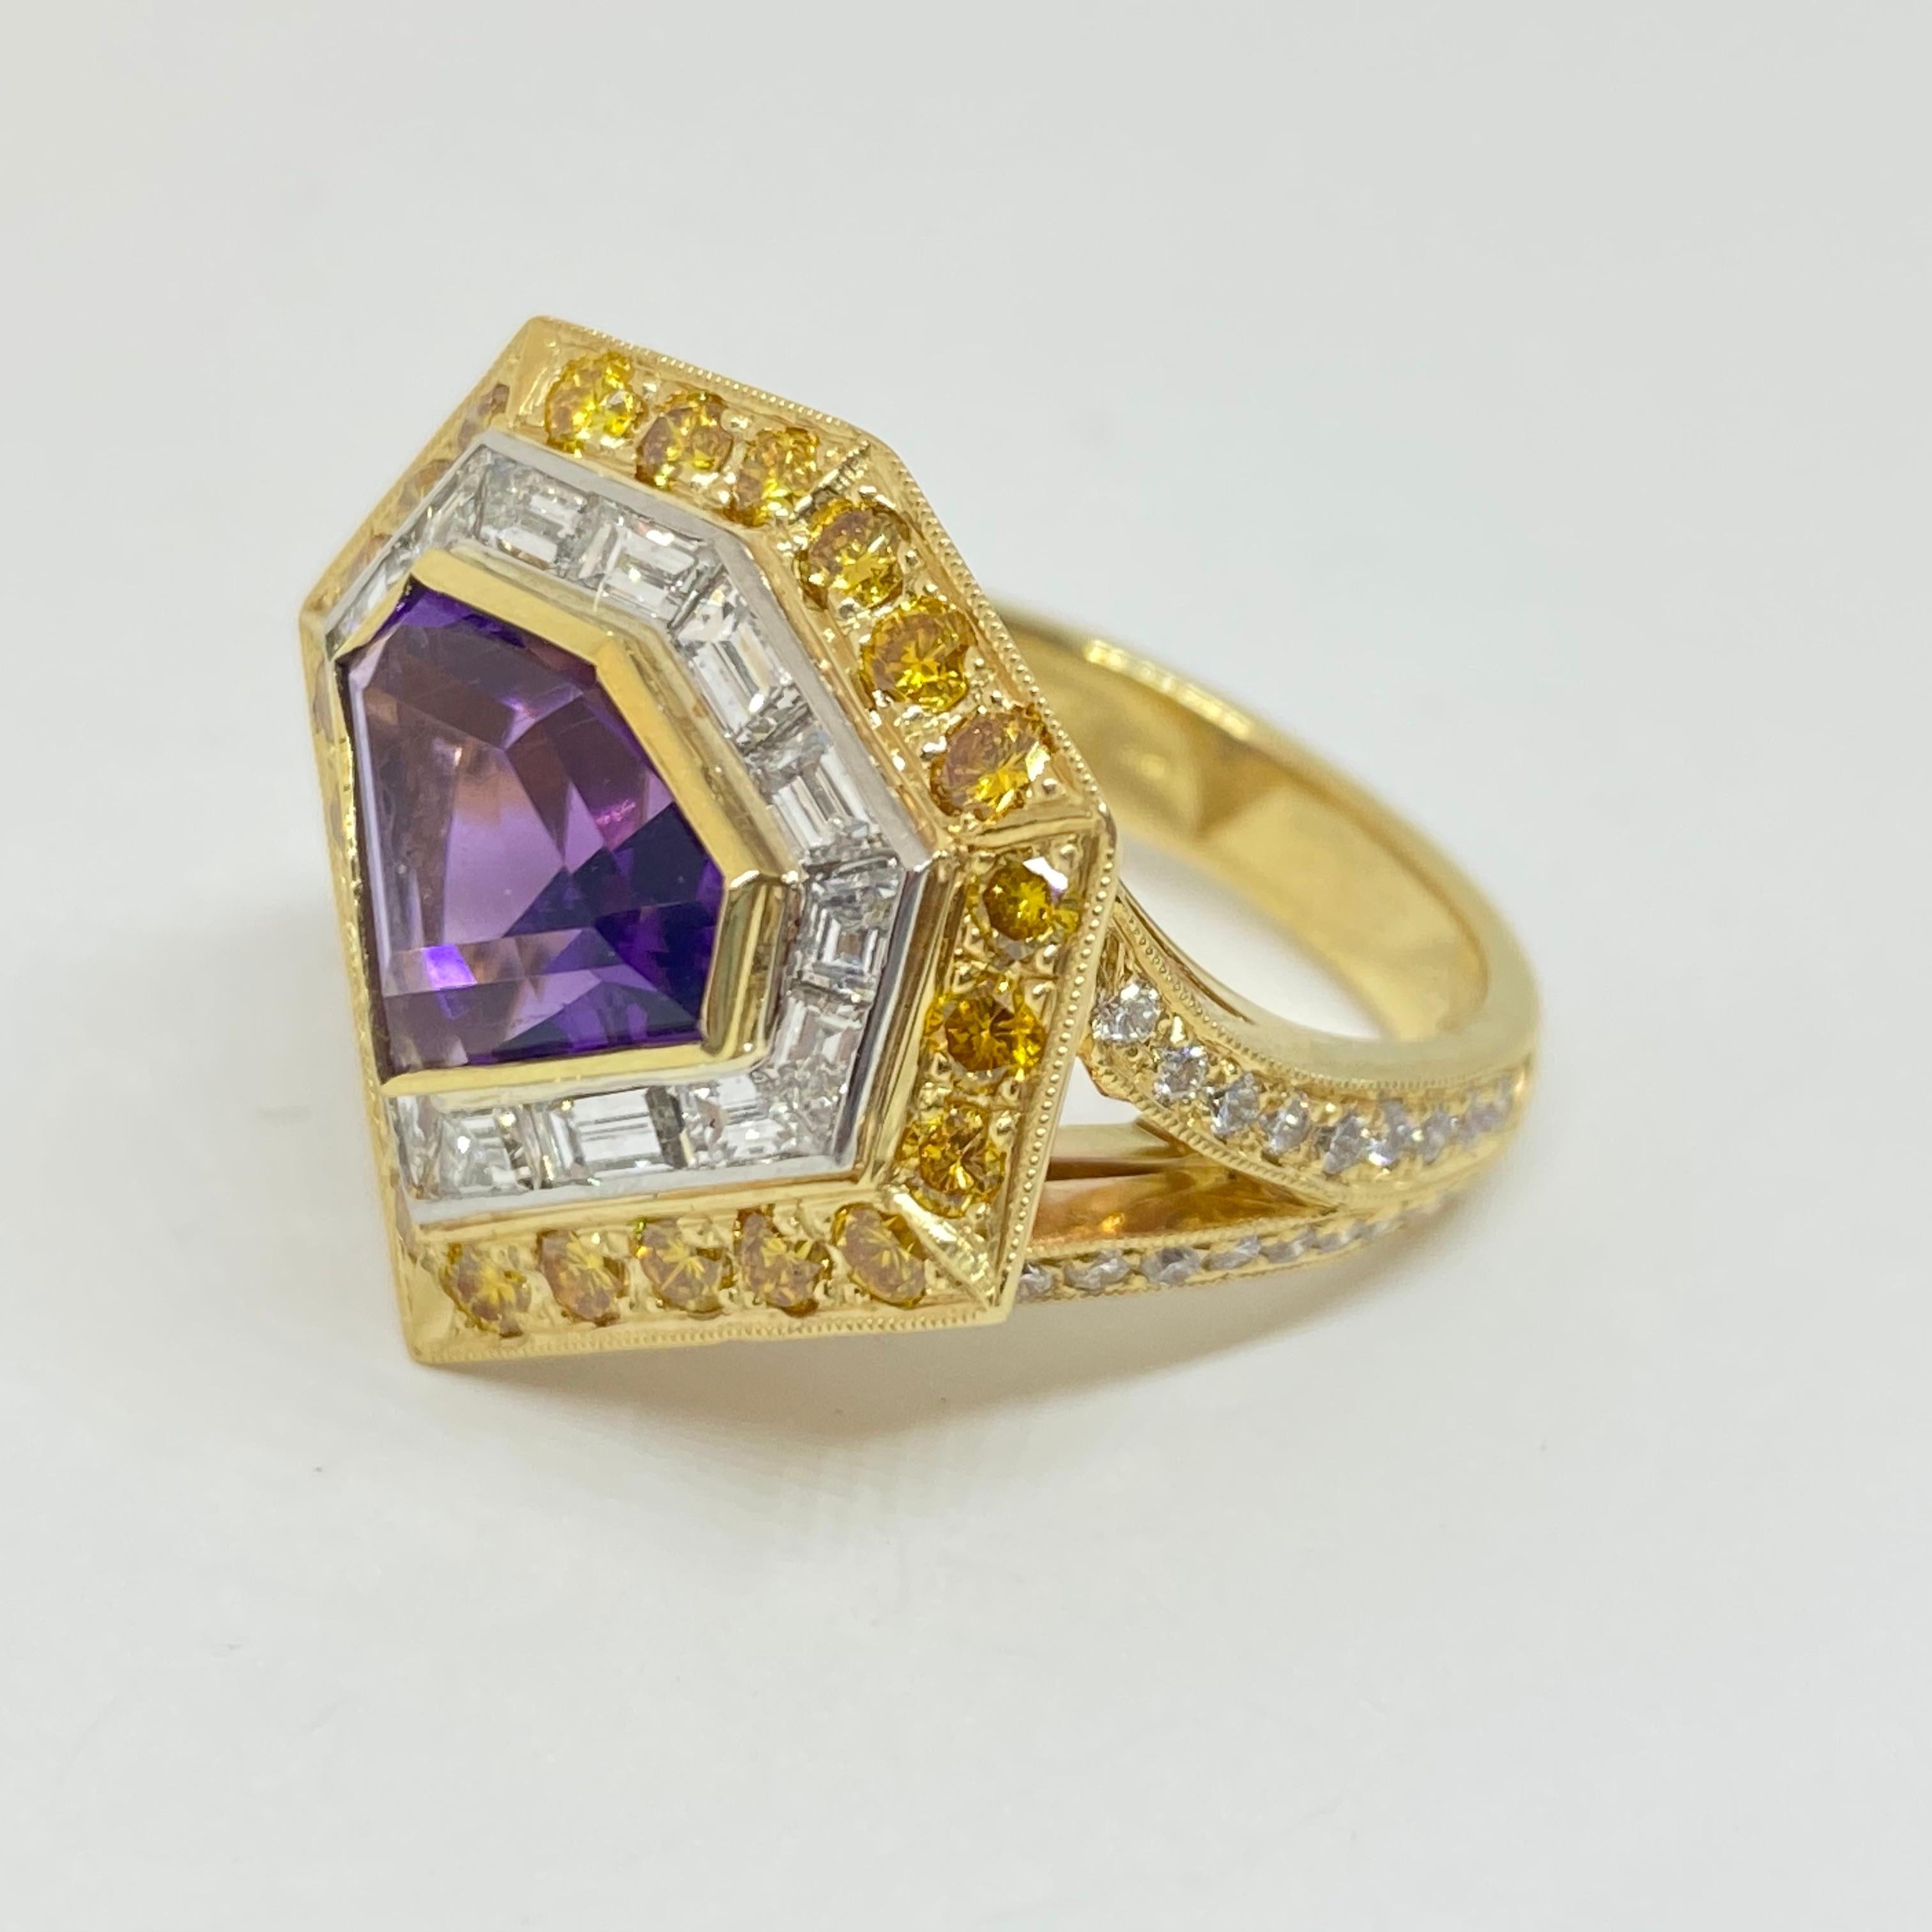 nique shield shaped kite Amethyst ring with double diamond halo.  The center kite shaped Amethyst is surrounded by 14 platinum channel set baguette diamonds weighing 1.40cts total. The diamond baguettes are surrounded by an additional halo of 22